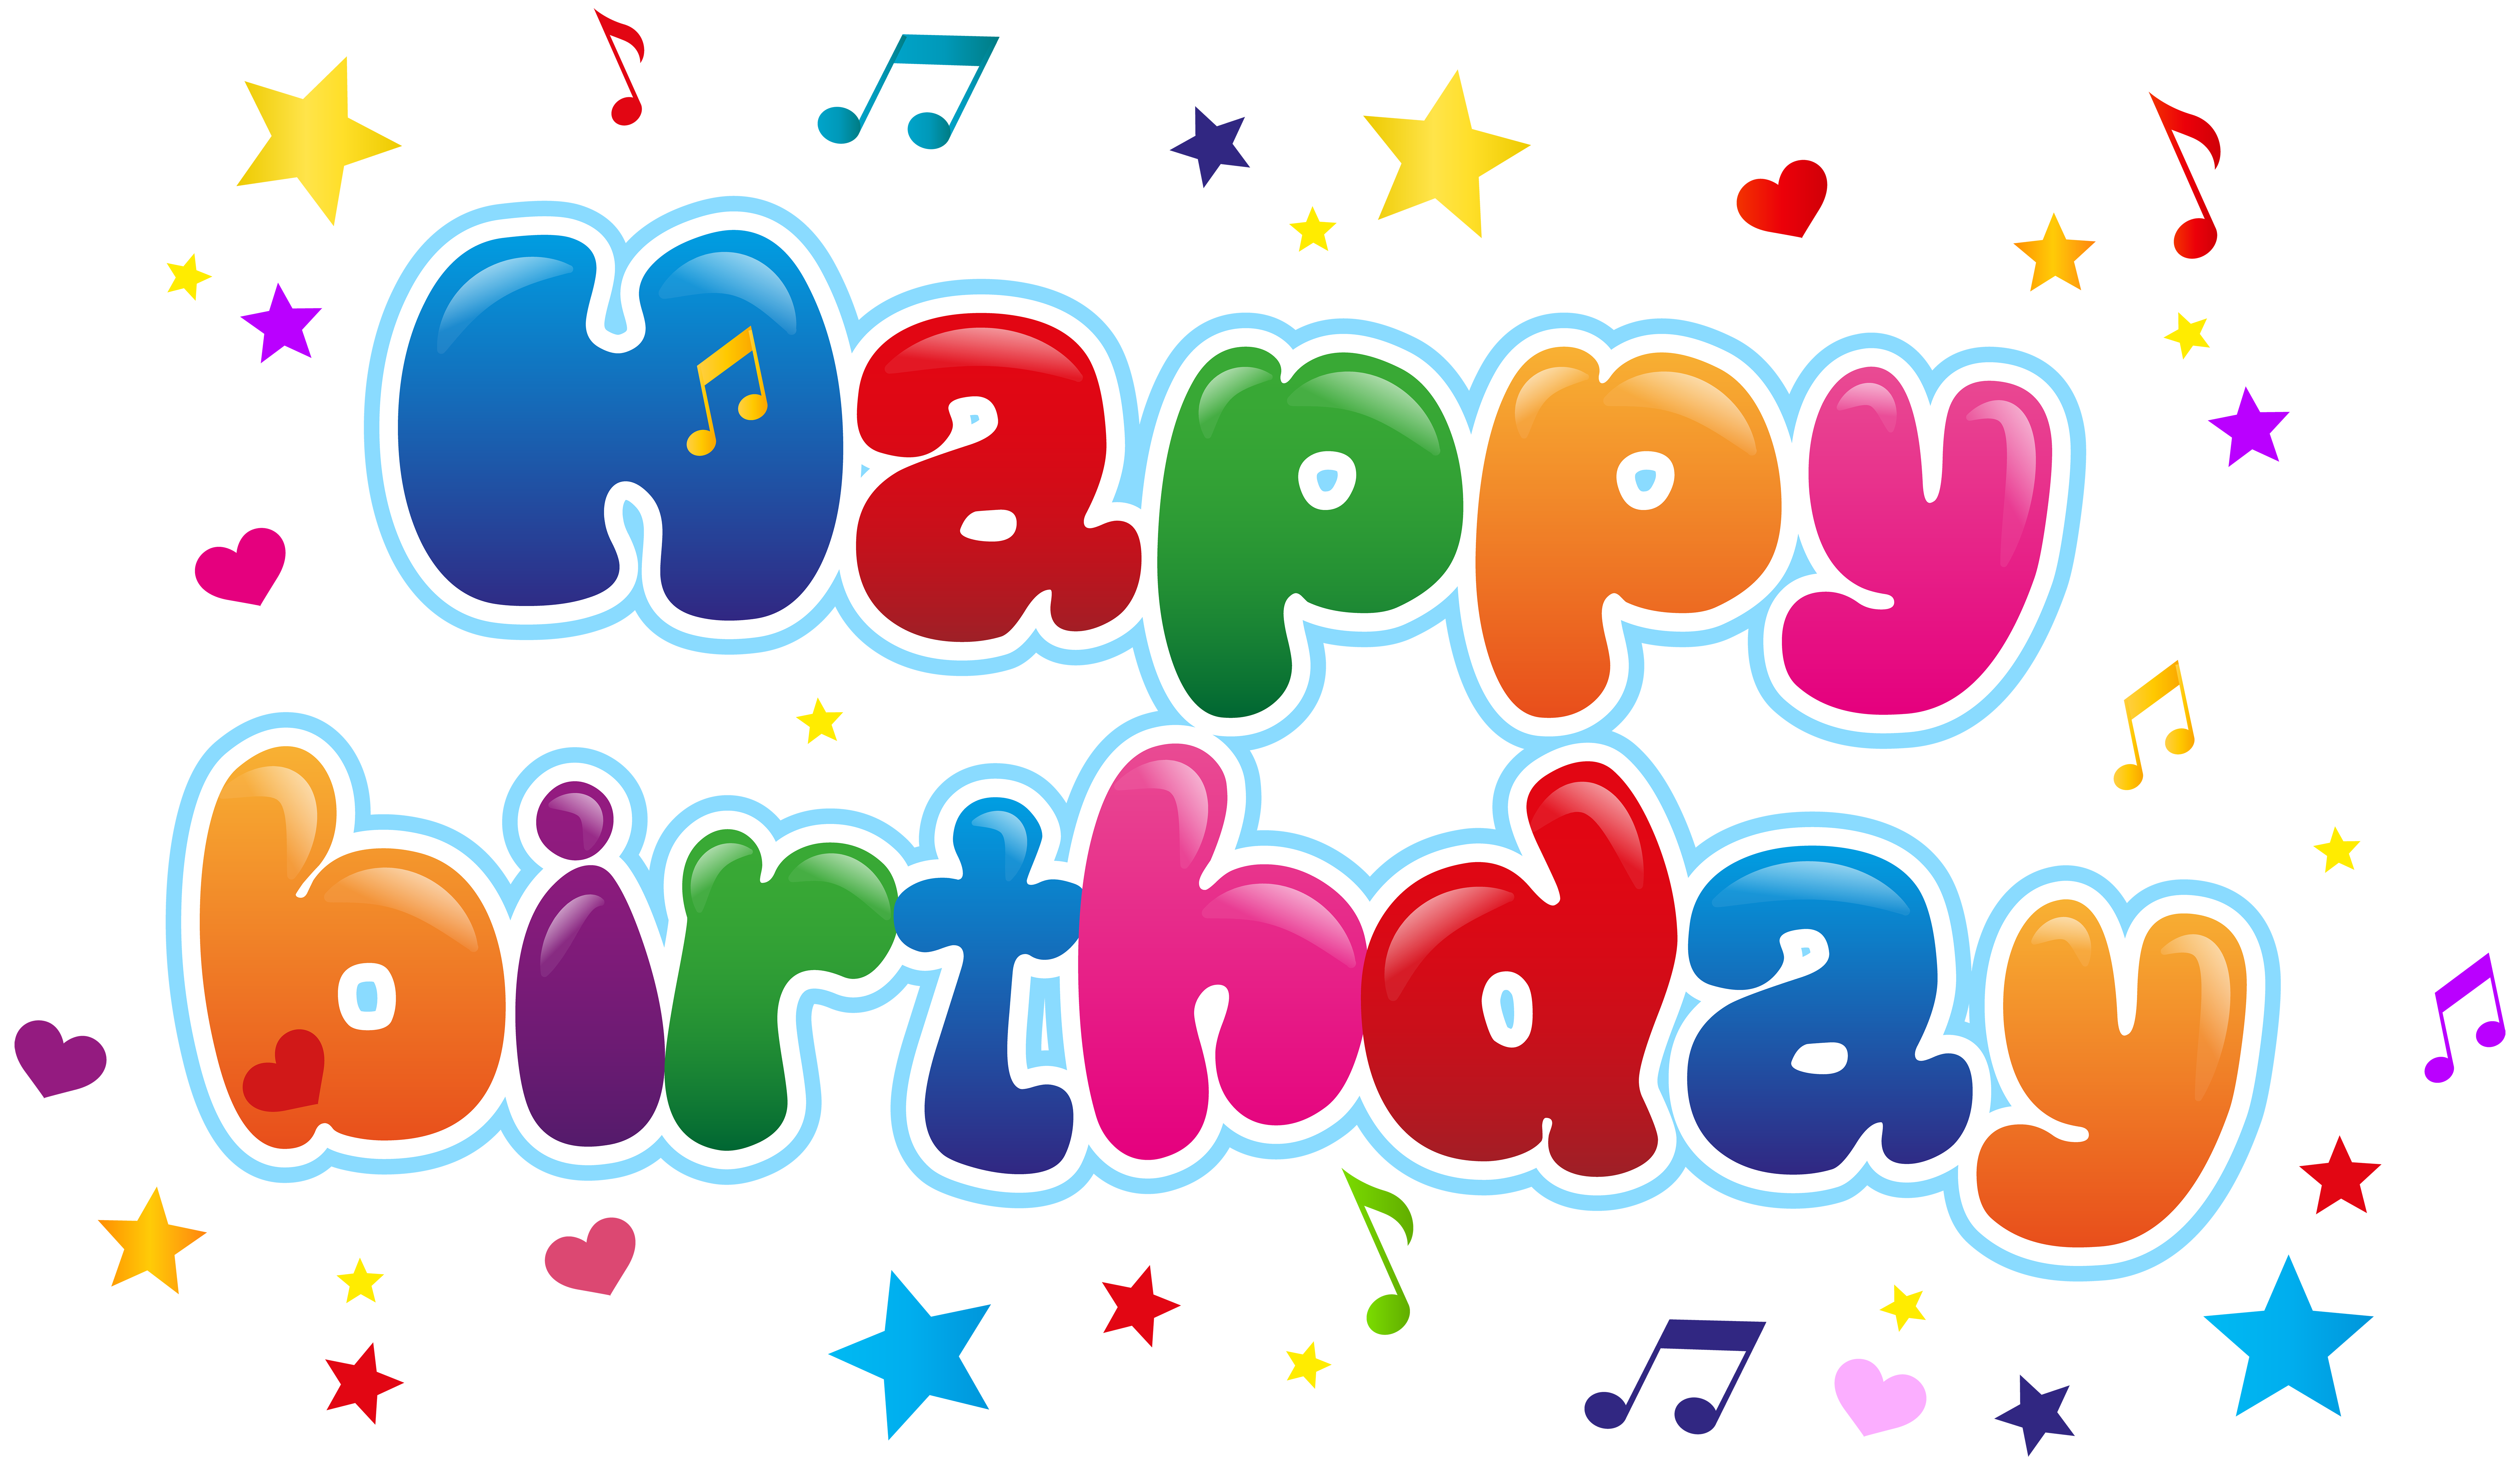 Cute Happy Birthday Png Clip Art Image - Birthday Animated, Transparent background PNG HD thumbnail